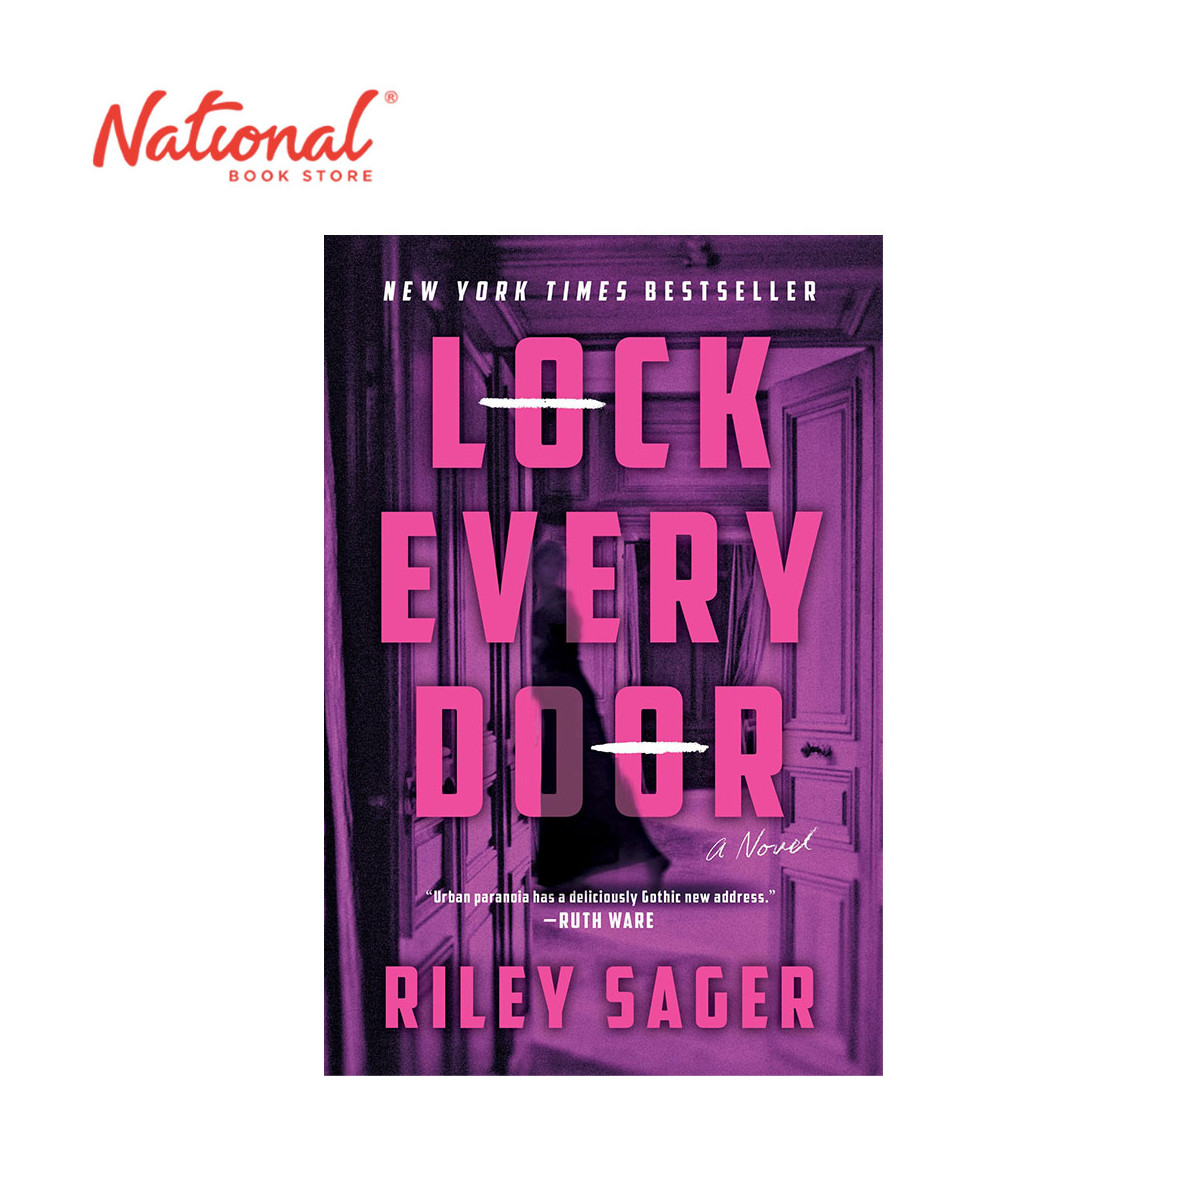 Lock Every Door: A Novel by Riley Sager - Trade Paperback - Thriller, Mystery & Suspense